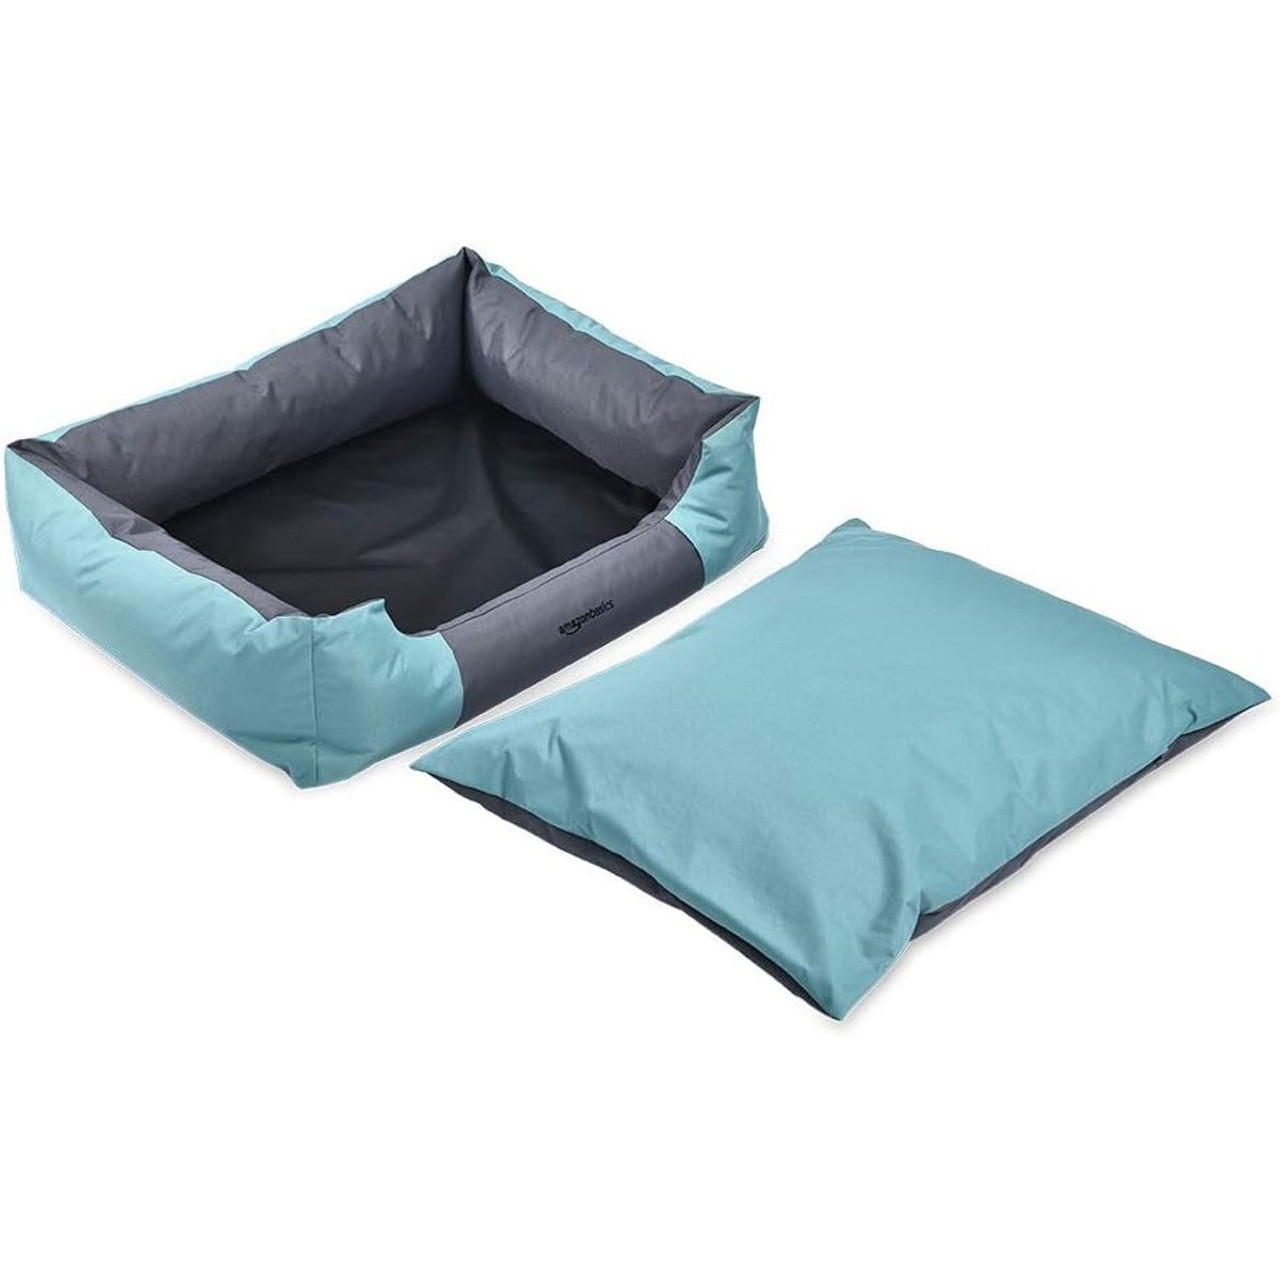 Water-Resistant Pet Bed by Amazon Basics product image